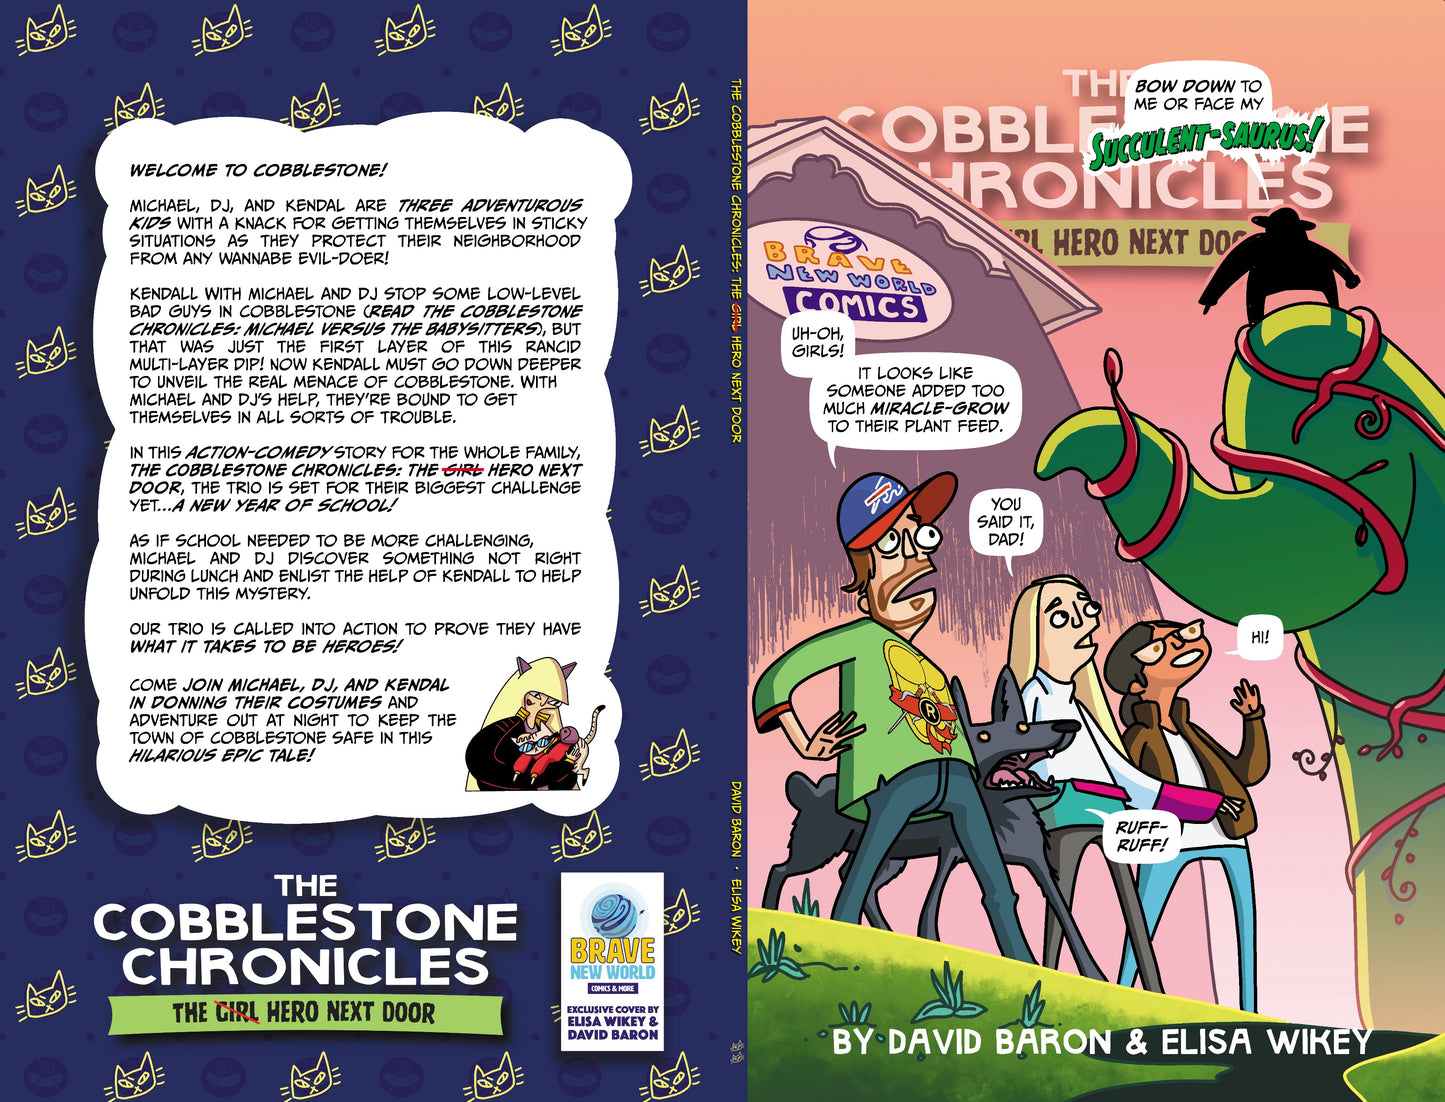 The Cobblestone Chronicles: The Hero Next Door Brave New World Comics Store Exclusive Variant by Baron & Wikey